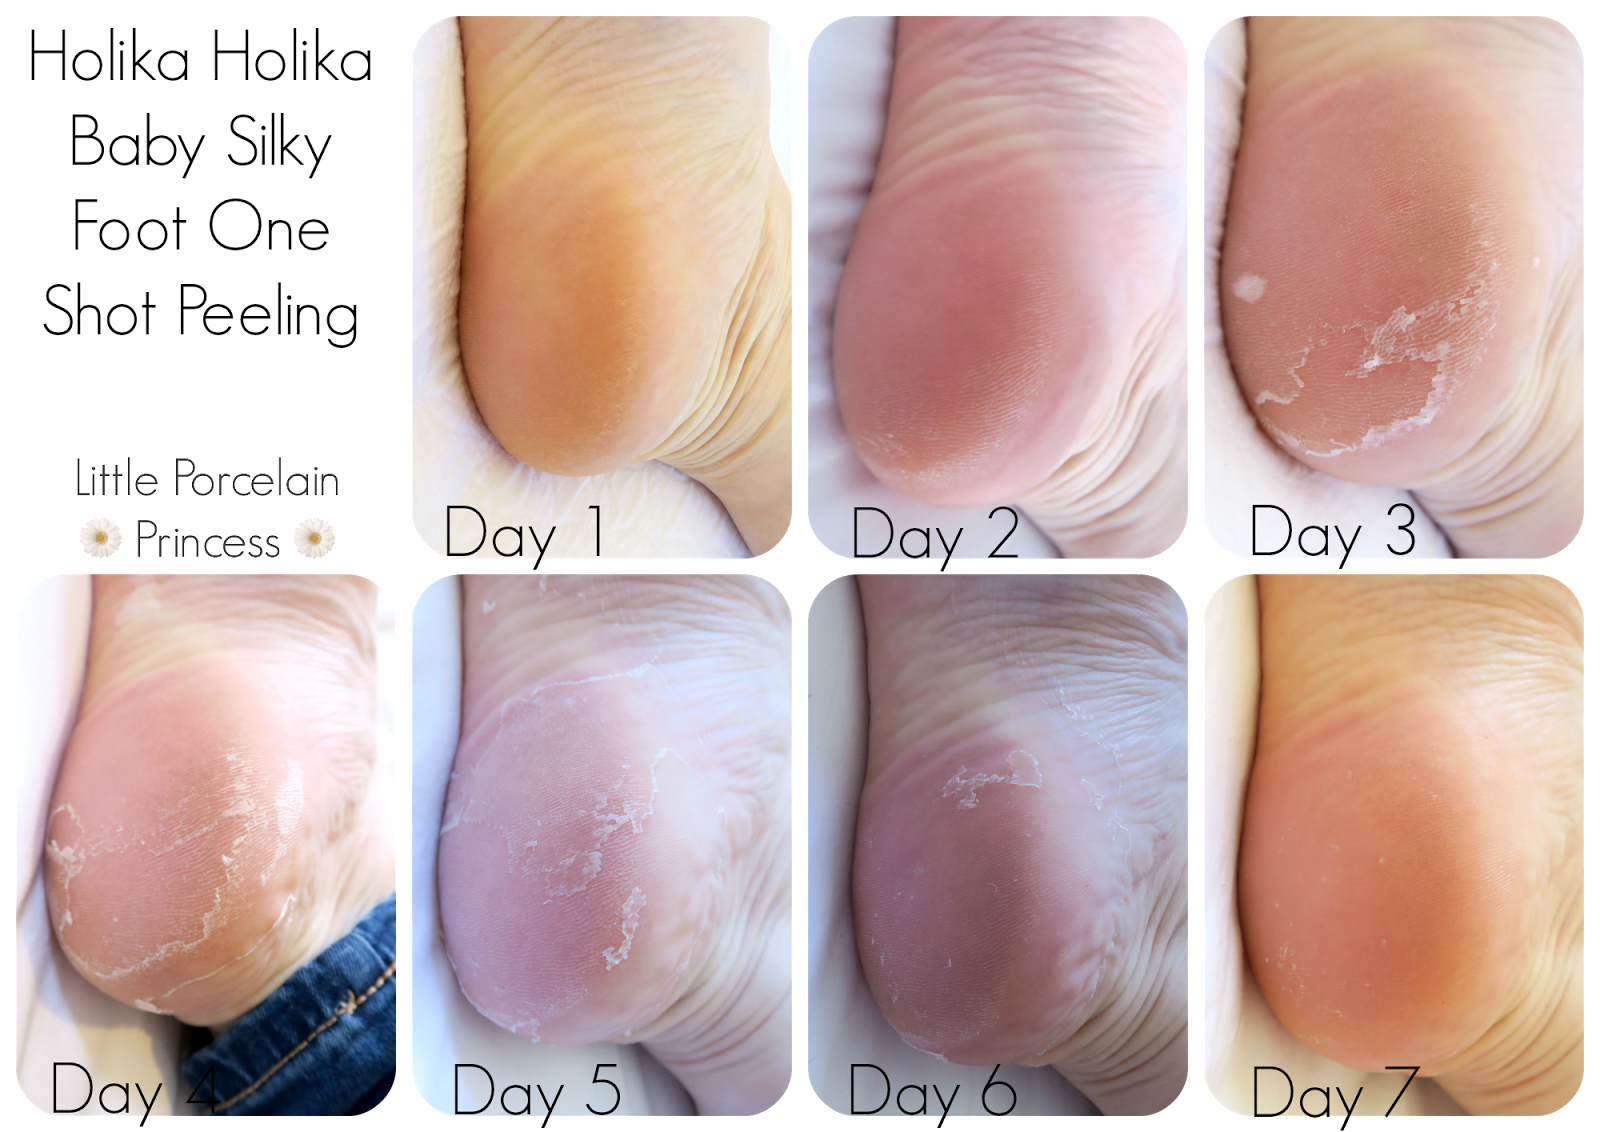 Baby Foot Peel Review - What to Know About Baby Foot Peel and If